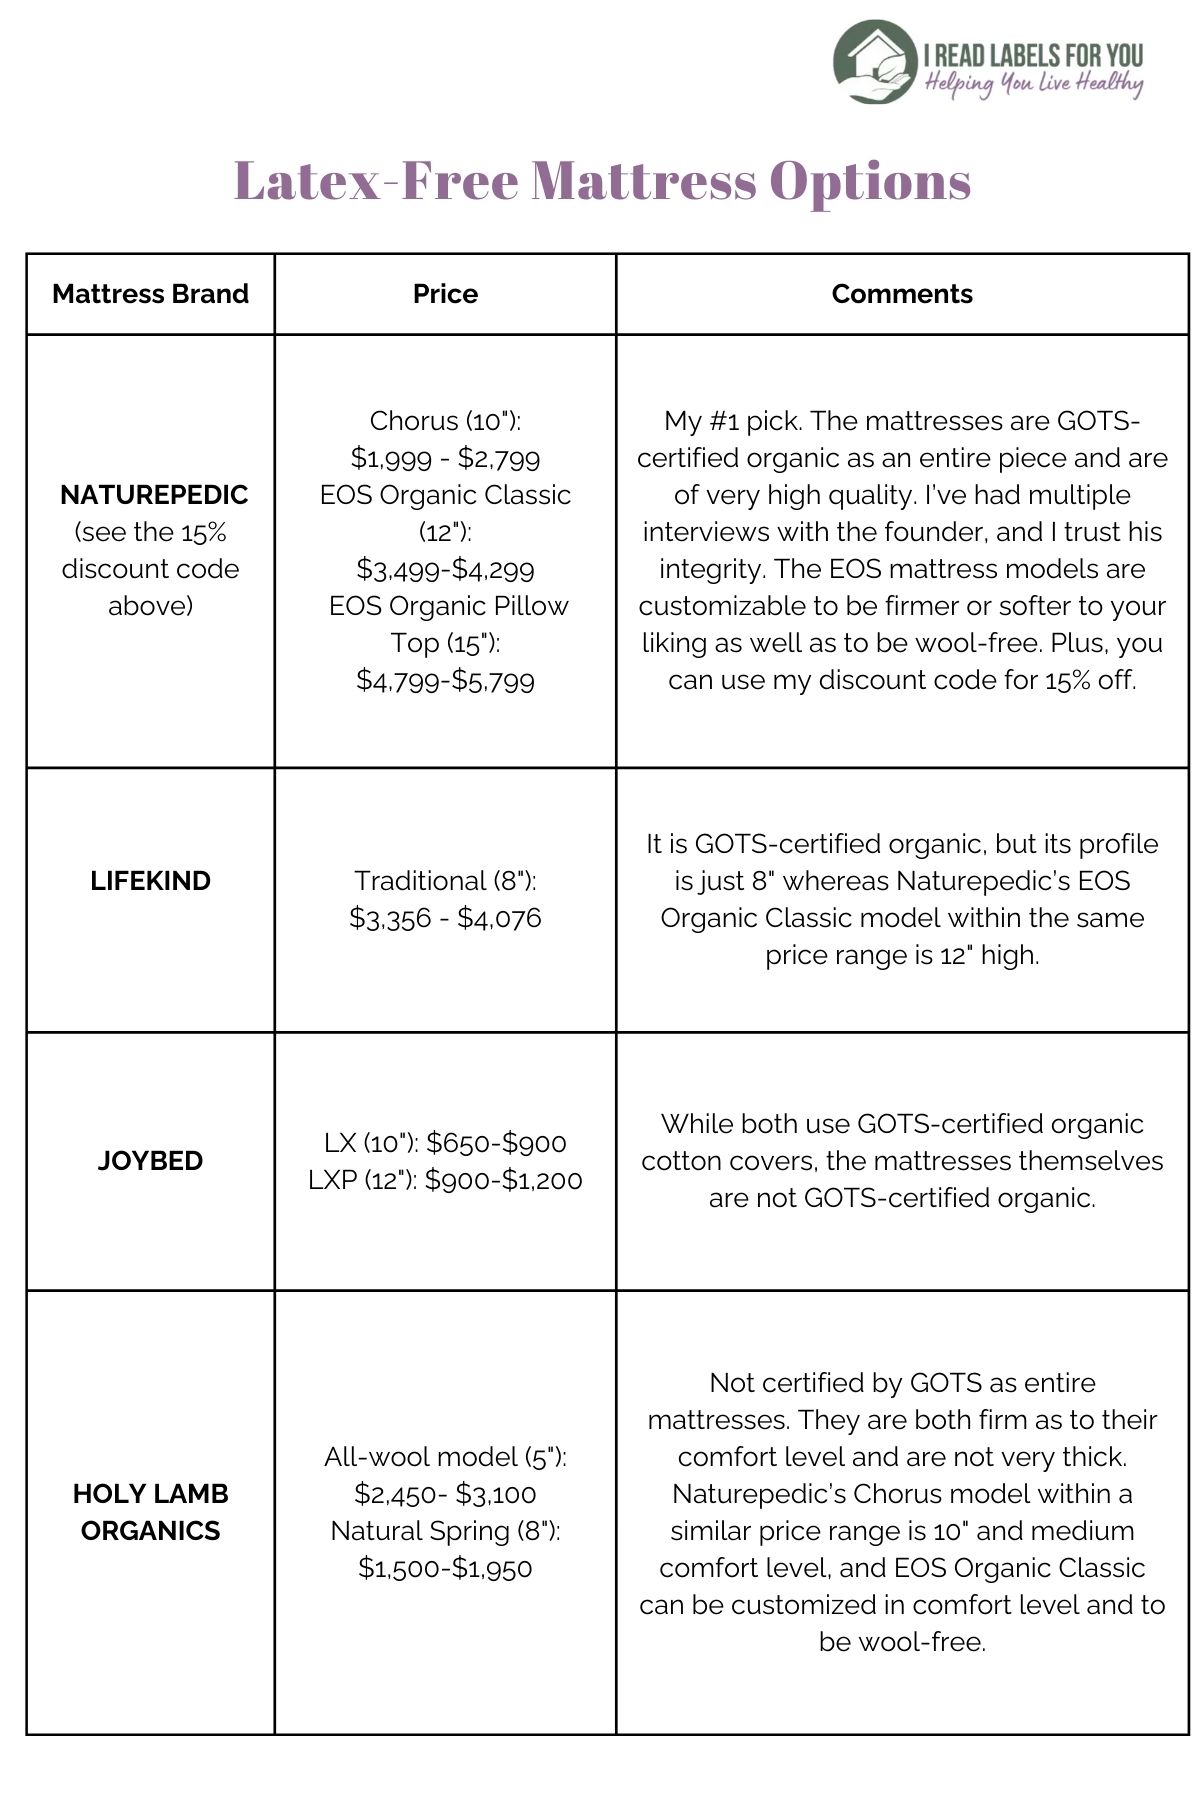 I Read Labels For You Latex-free mattress options comparative chart part one.